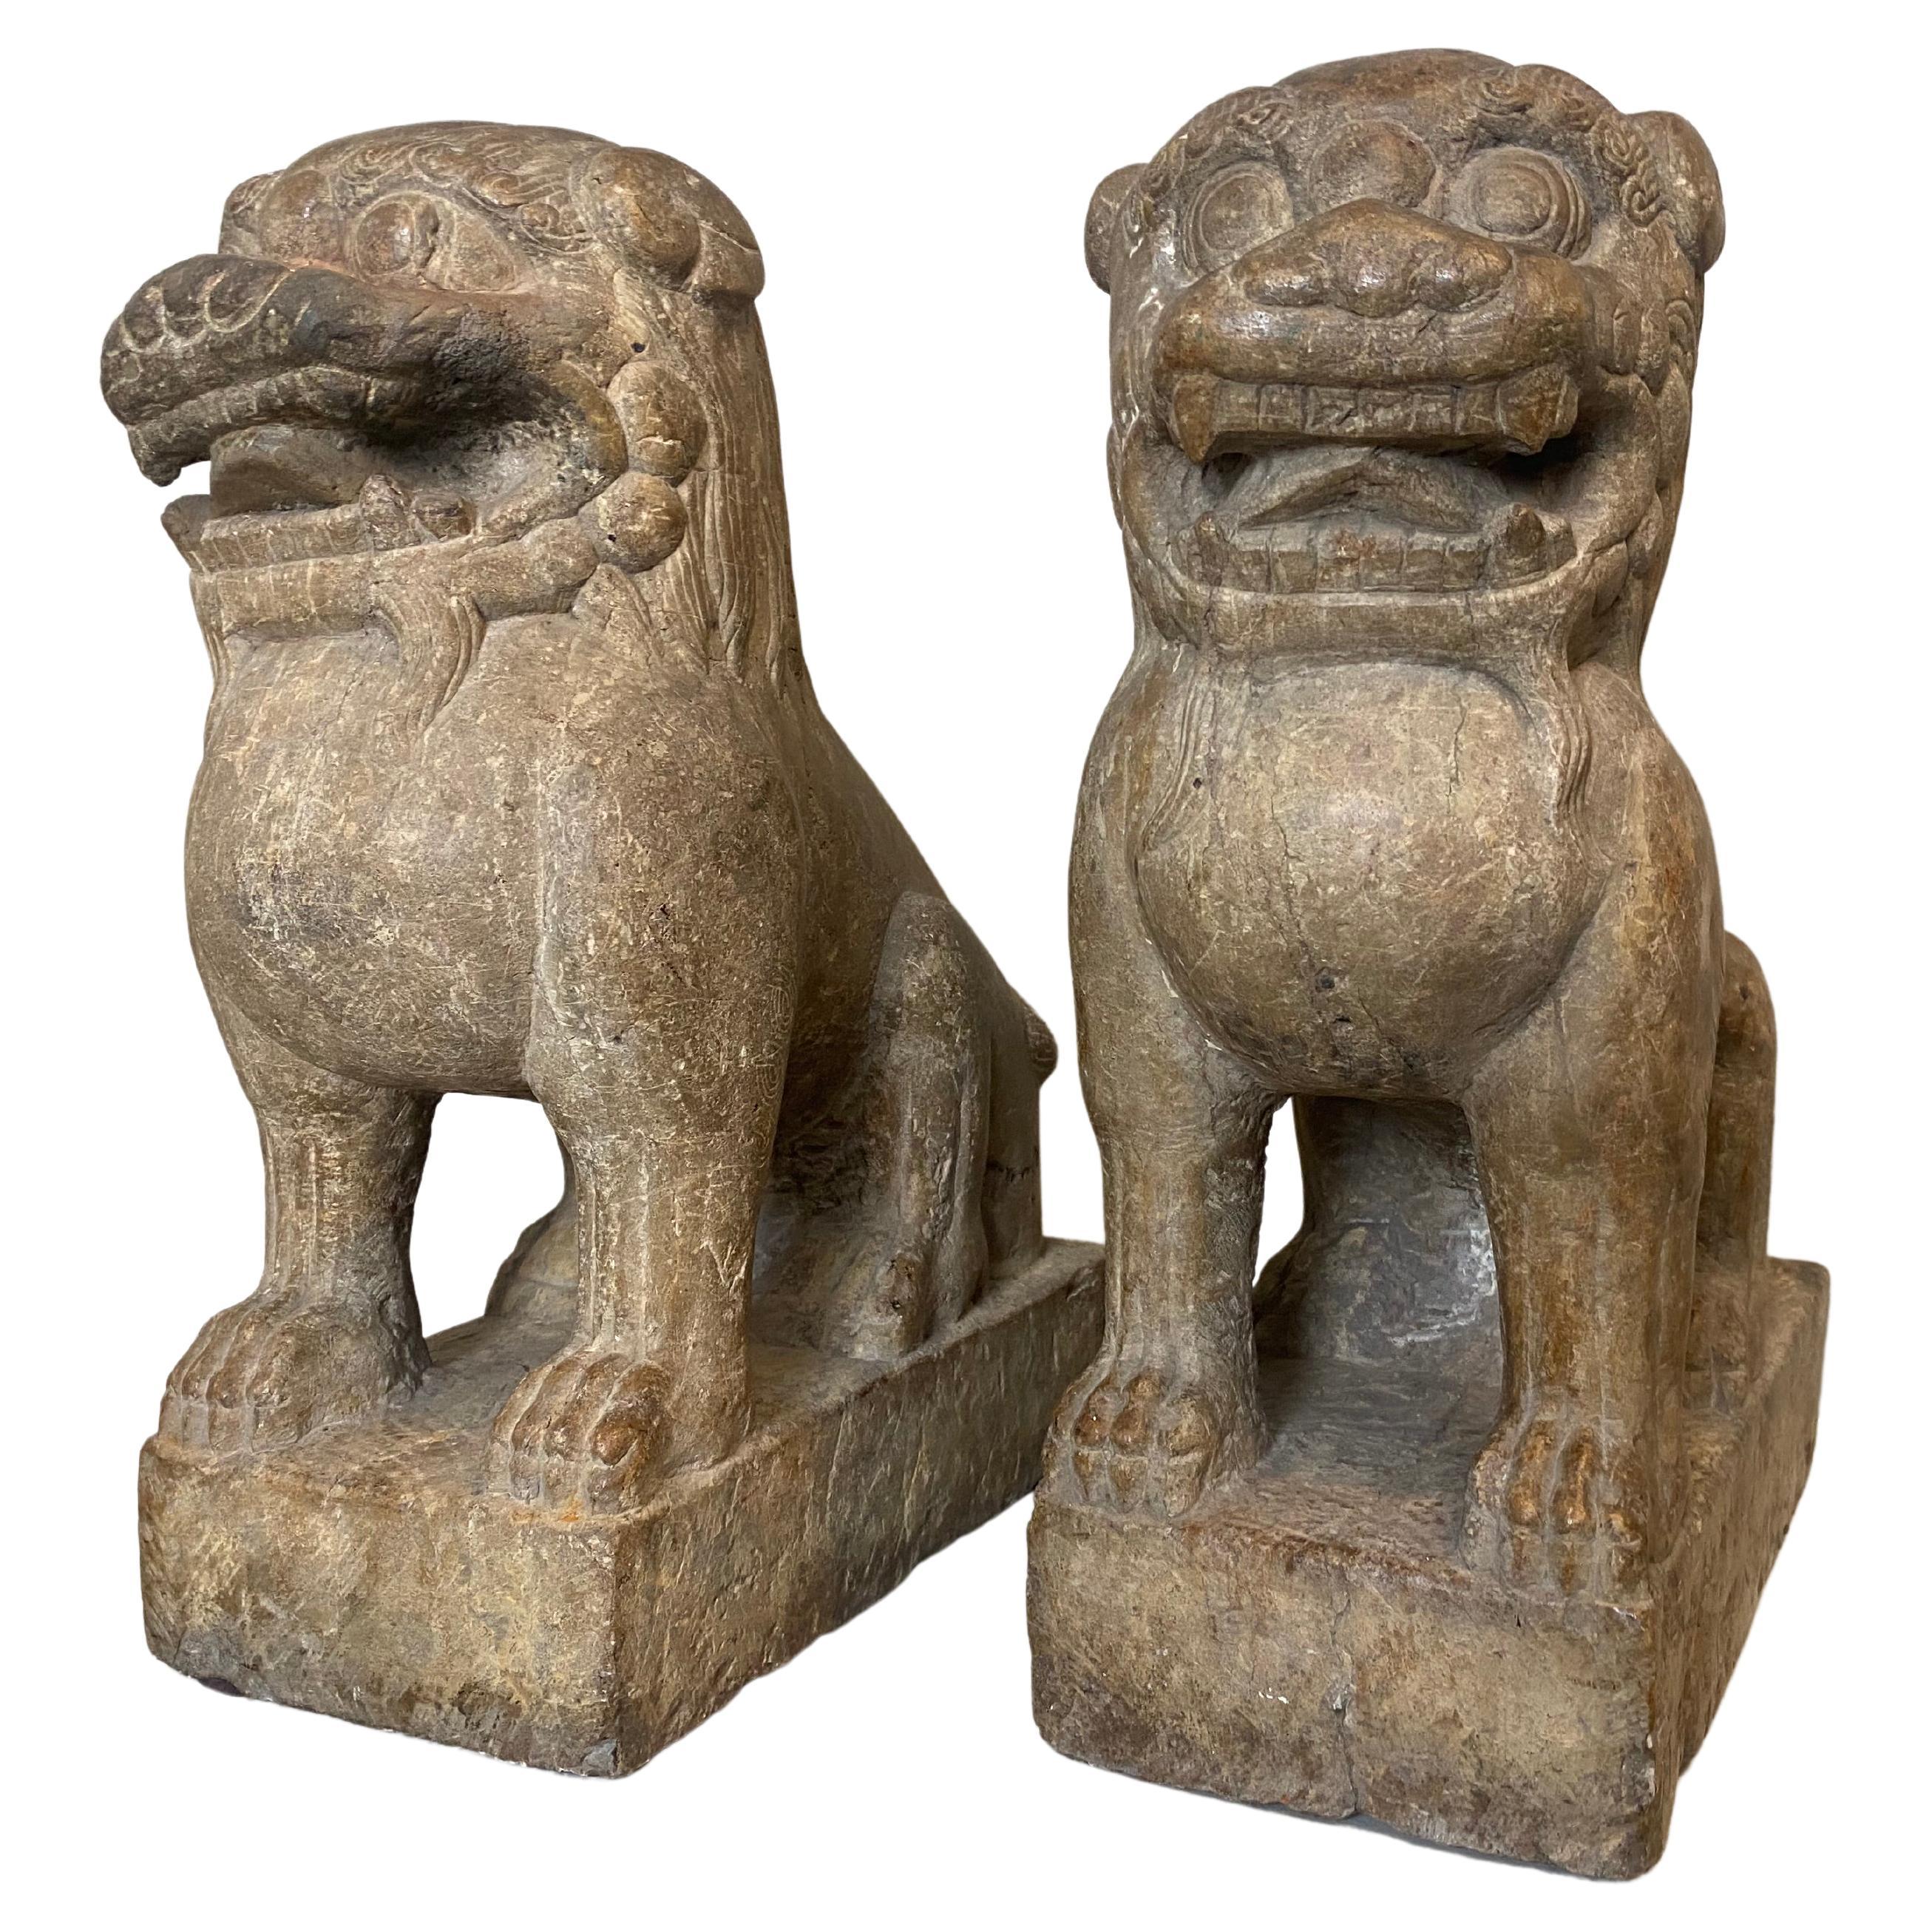 Exceptional Pair of Marble Lions from China with great, old patina, Ming Period